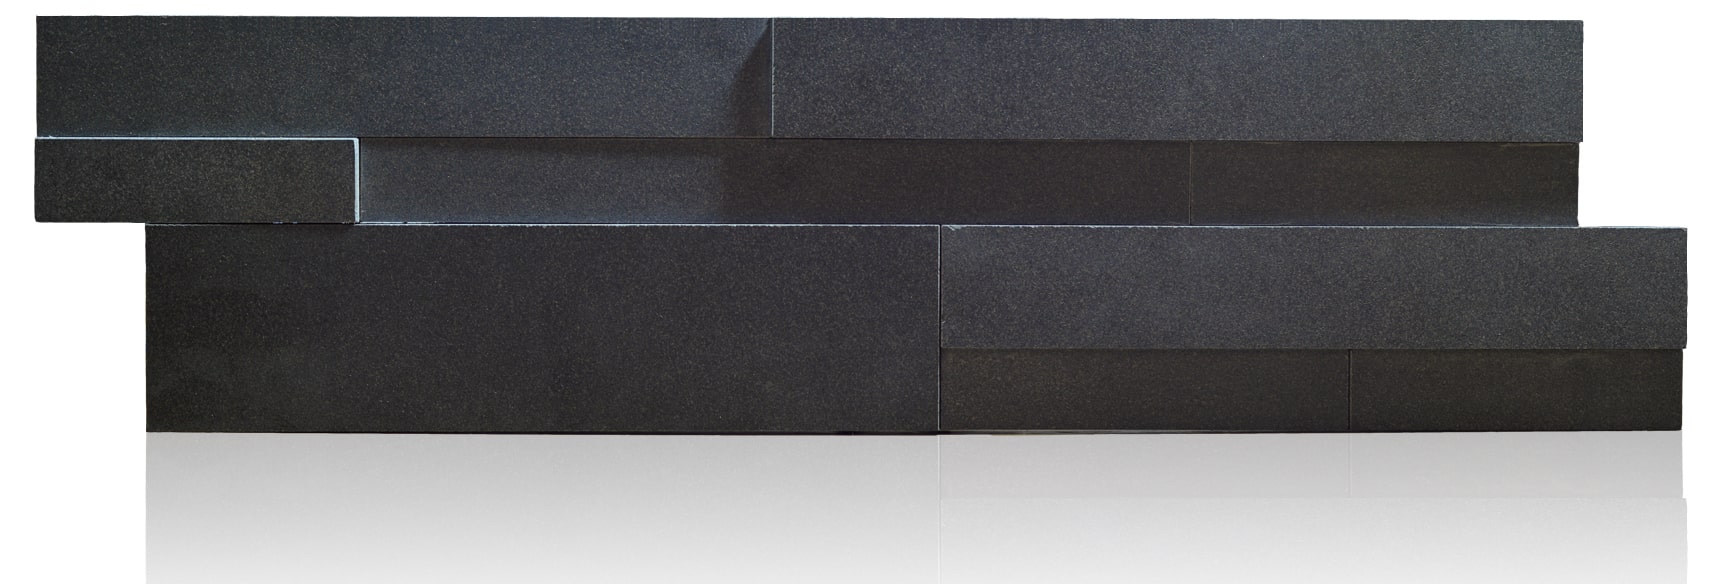 Field Unit of Norstone Aksent Series 3D Panel shown in Ebony Basalt color